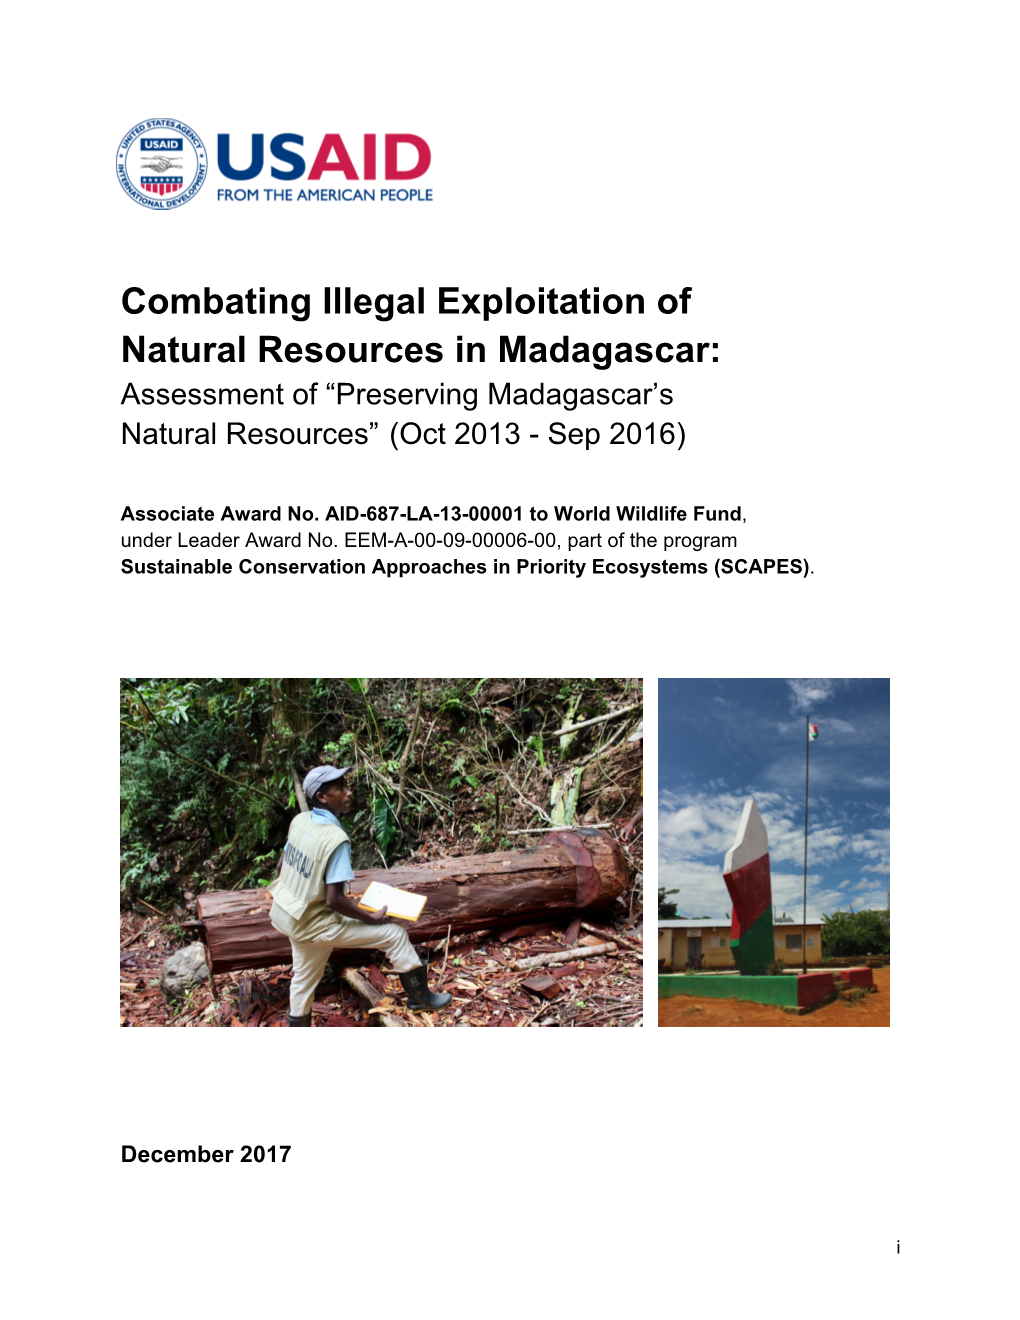 Combating Illegal Exploitation of Natural Resources in Madagascar: Assessment of “Preserving Madagascar’S Natural Resources” (Oct 2013 - Sep 2016)